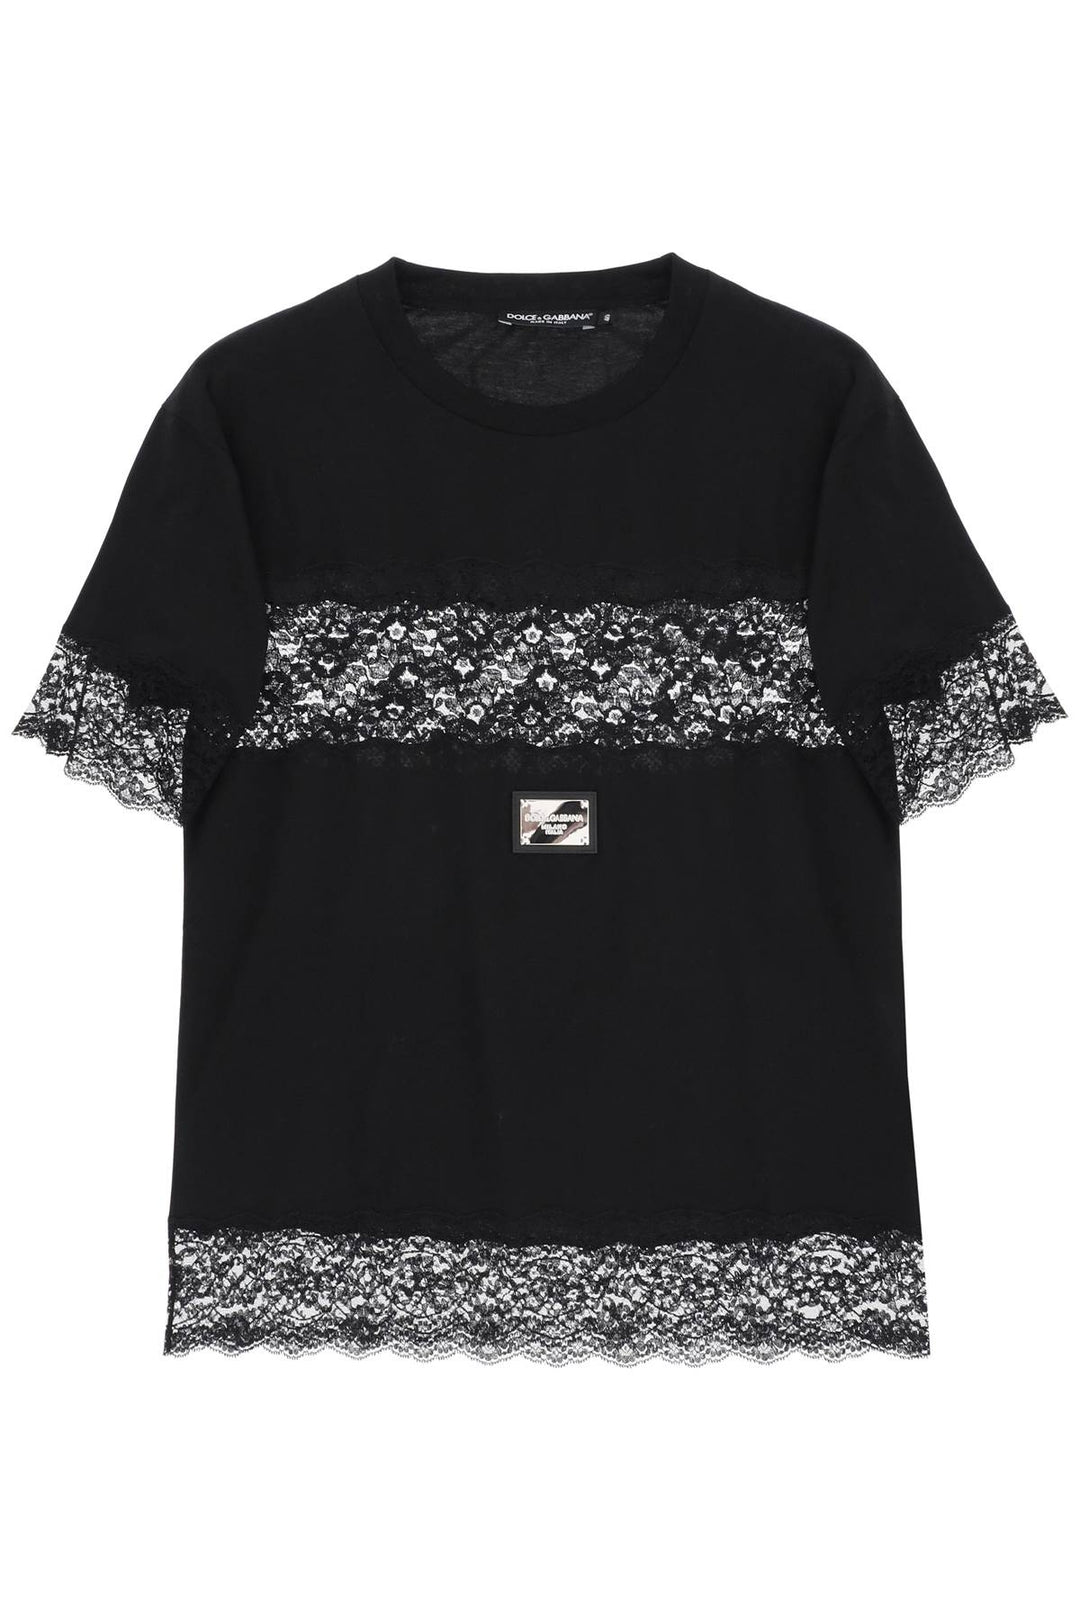 Dolce & gabbana t-shirt with lace inserts-0